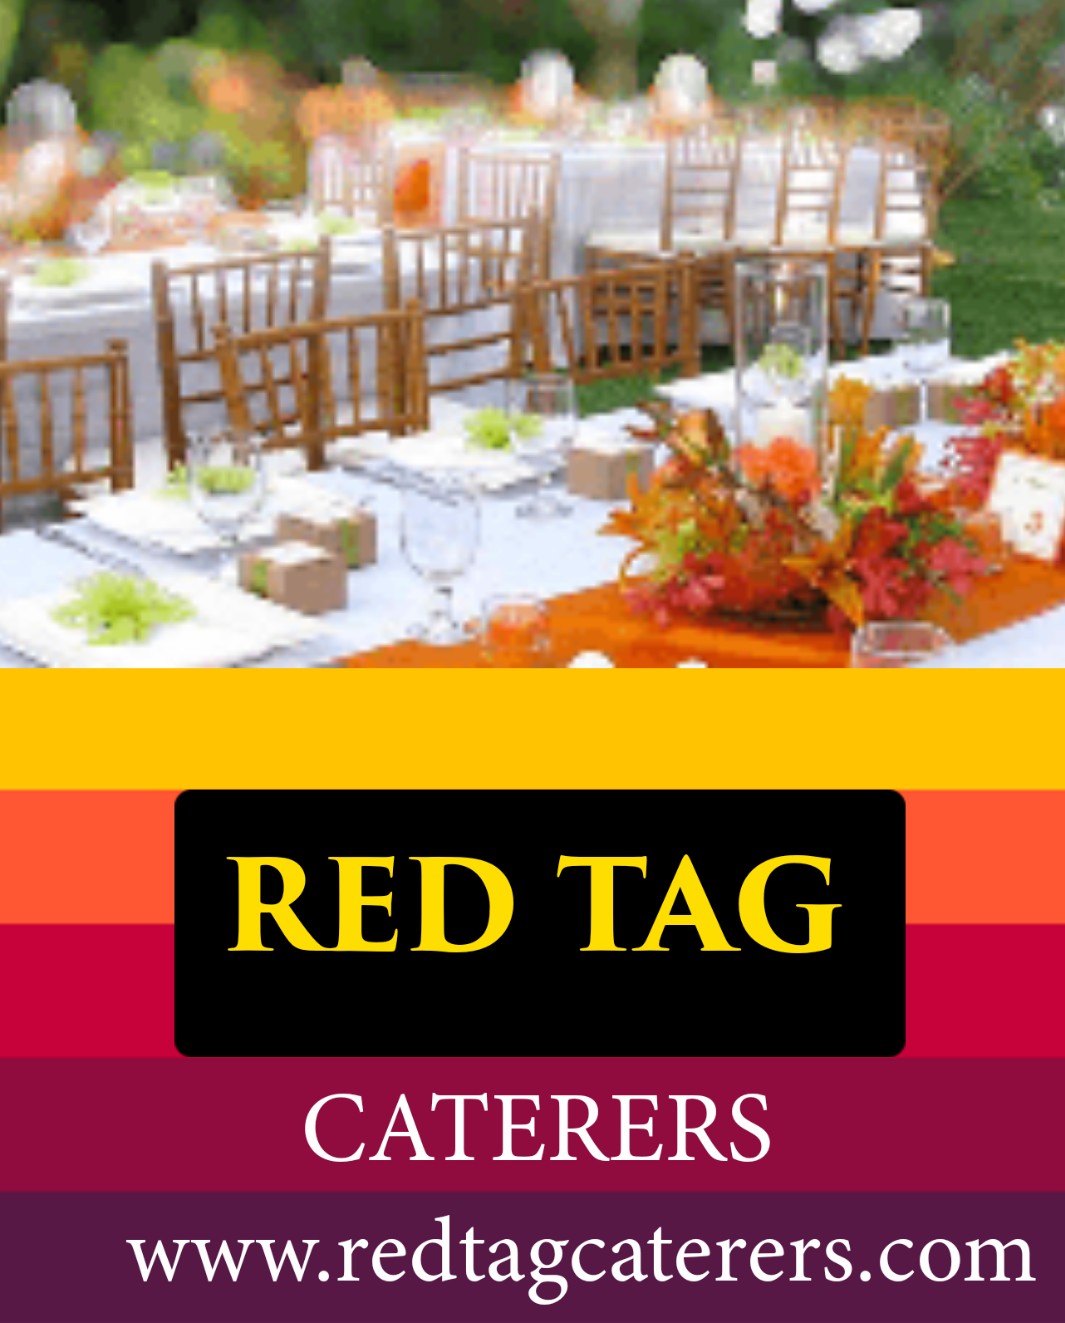 BEST CATERERS IN LUDHIANA WITH INNOVATIVE TEAM  | Red Tag Caterers | Best caterers in Ludhiana with innovative team, best catering service in Ludhiana, affordable catering in Ludhiana, top one caterers in Ludhiana, non-vegetarian catering in Ludhiana,  - GL44264